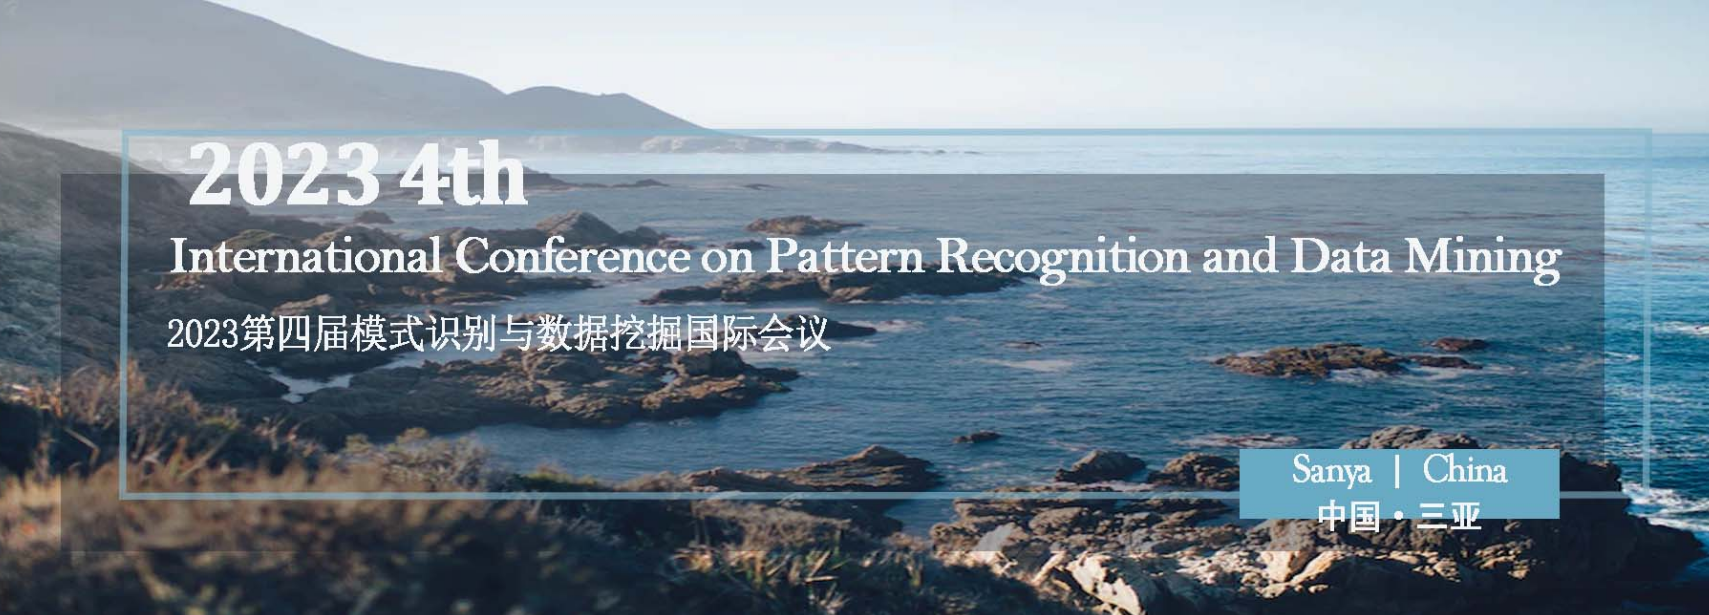 2023 4th International Conference on Pattern Recognition and Data Mining (PRDM 2023) -EI Compendex, Sanya, Hainan, China